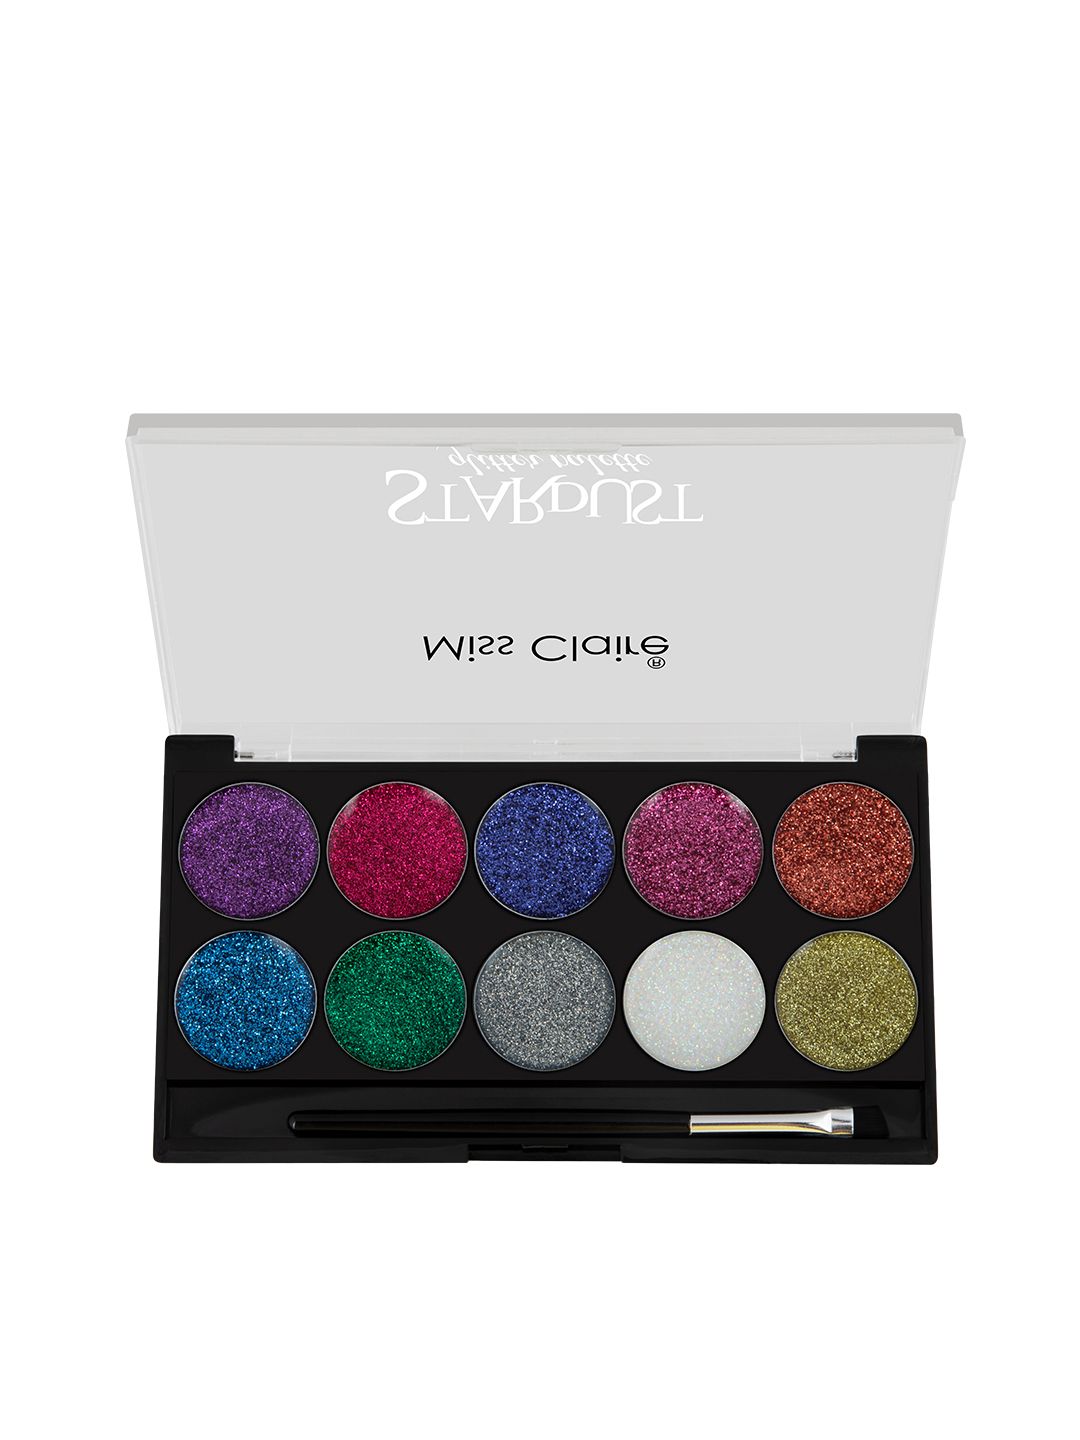 Miss Claire Stardust Glitter Palette Price in India